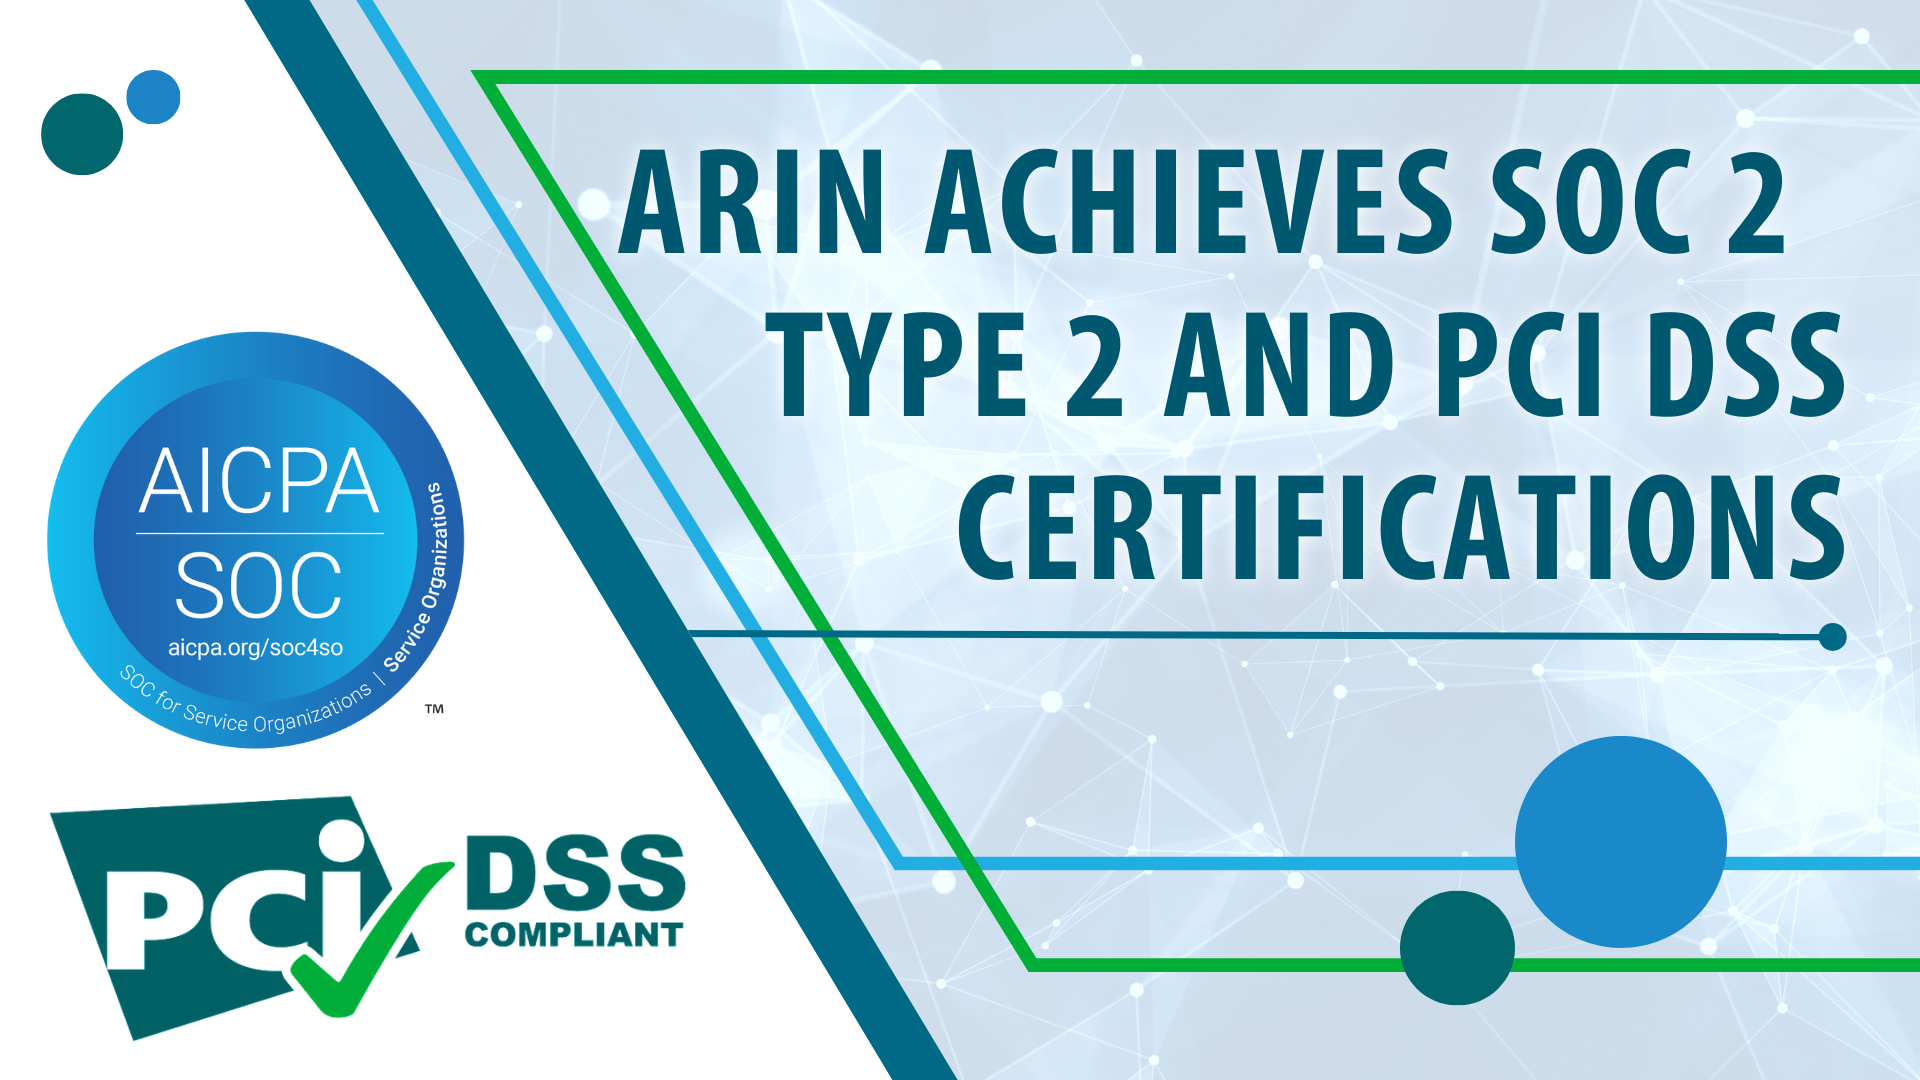 ARIN Achieves Compliance with SOC 2 Type 2 and PCI DSS Security Standards